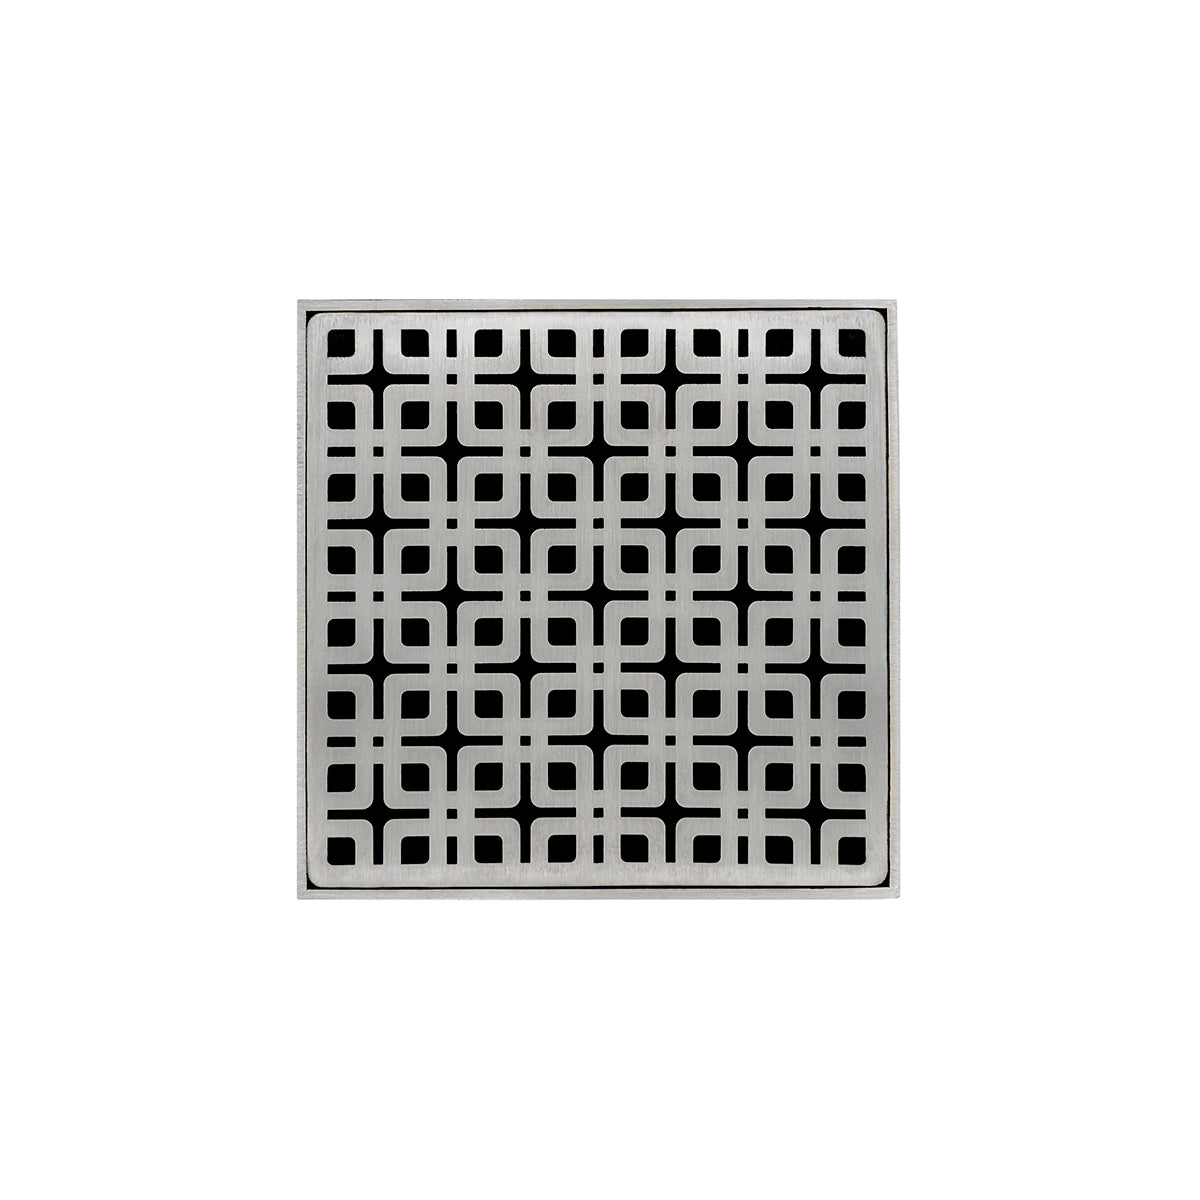 Infinity Drain 5" x 5" KD 5 High Flow Premium Center Drain Kit with Link Pattern Decorative Plate with ABS Drain Body, 3" Outlet